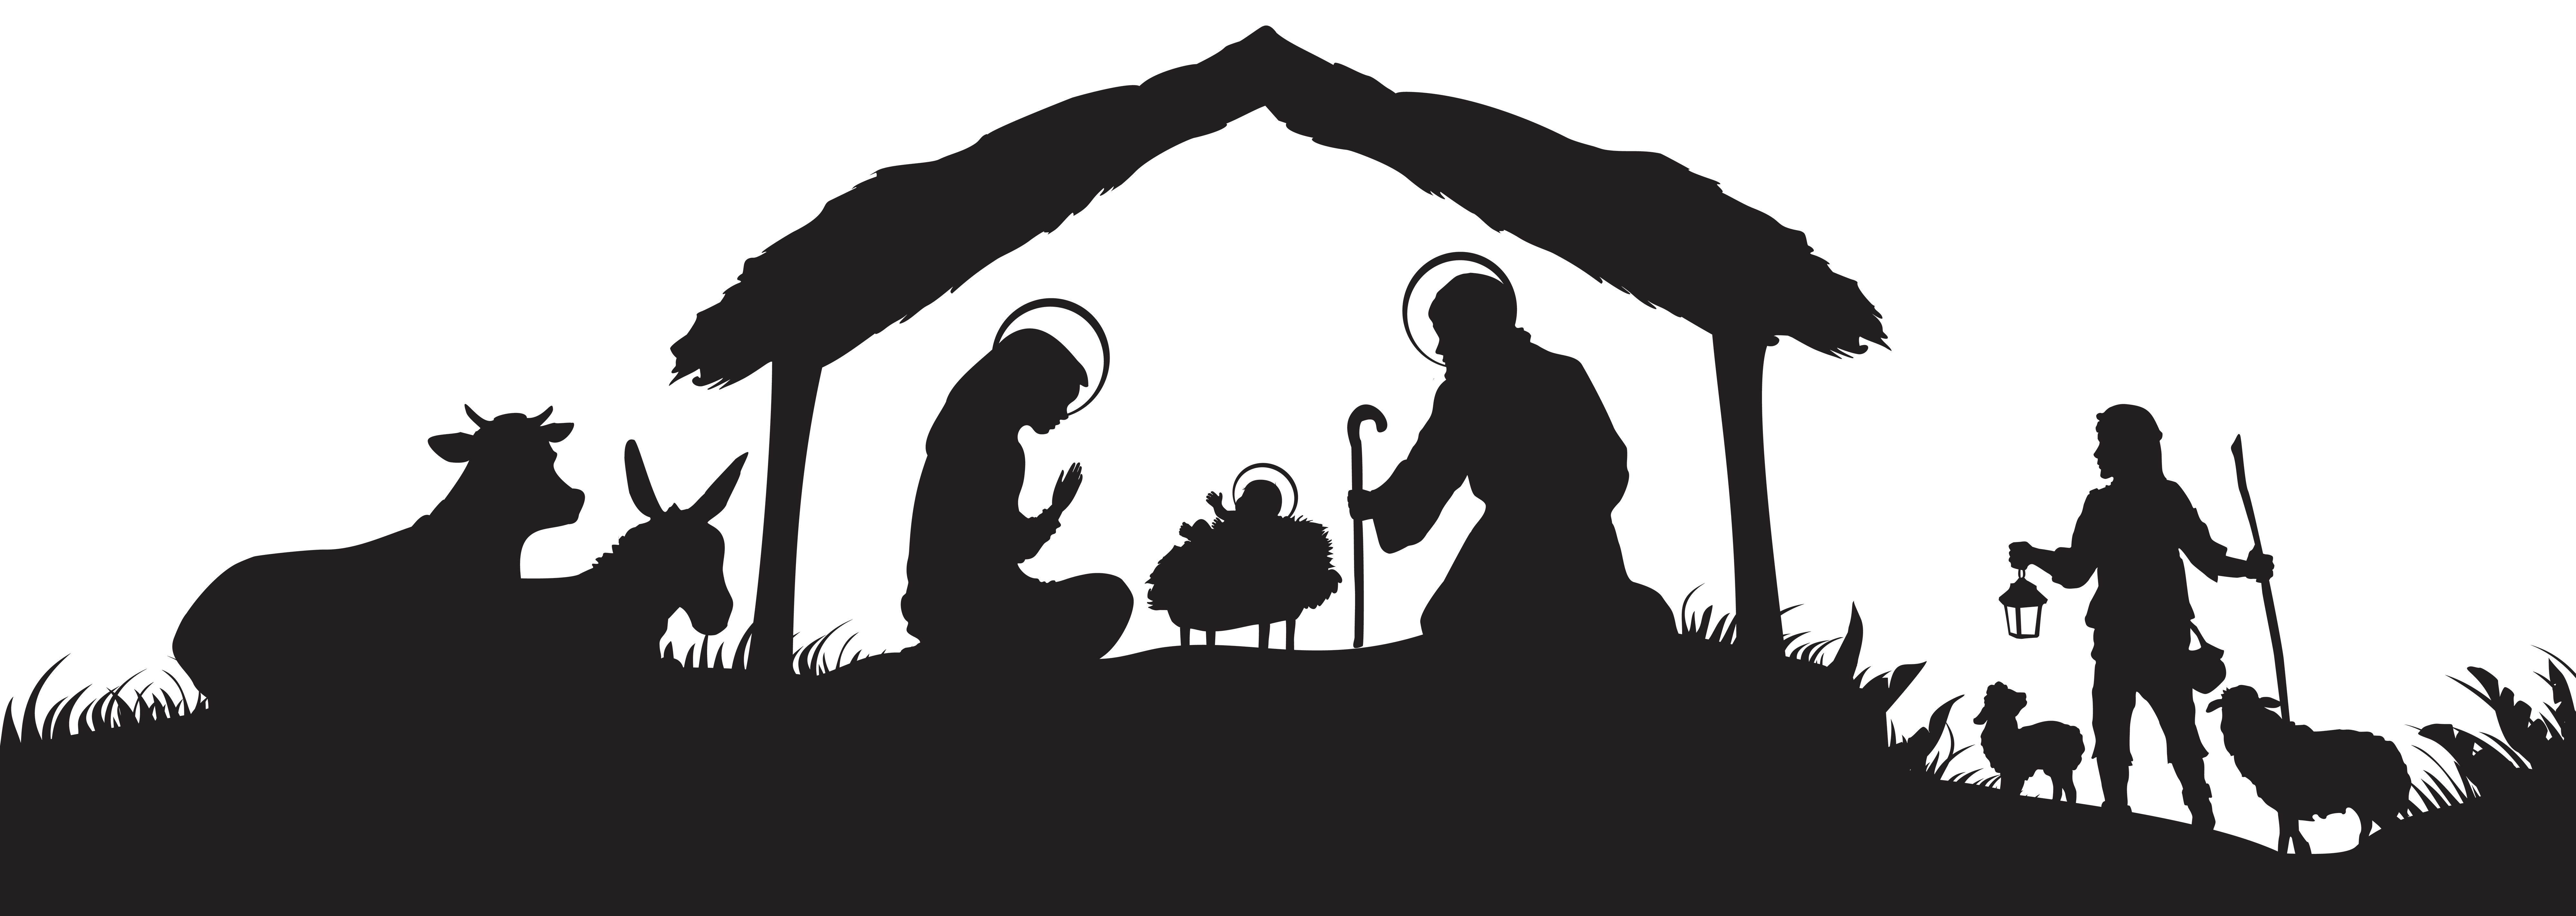 manger clipart christmas day service